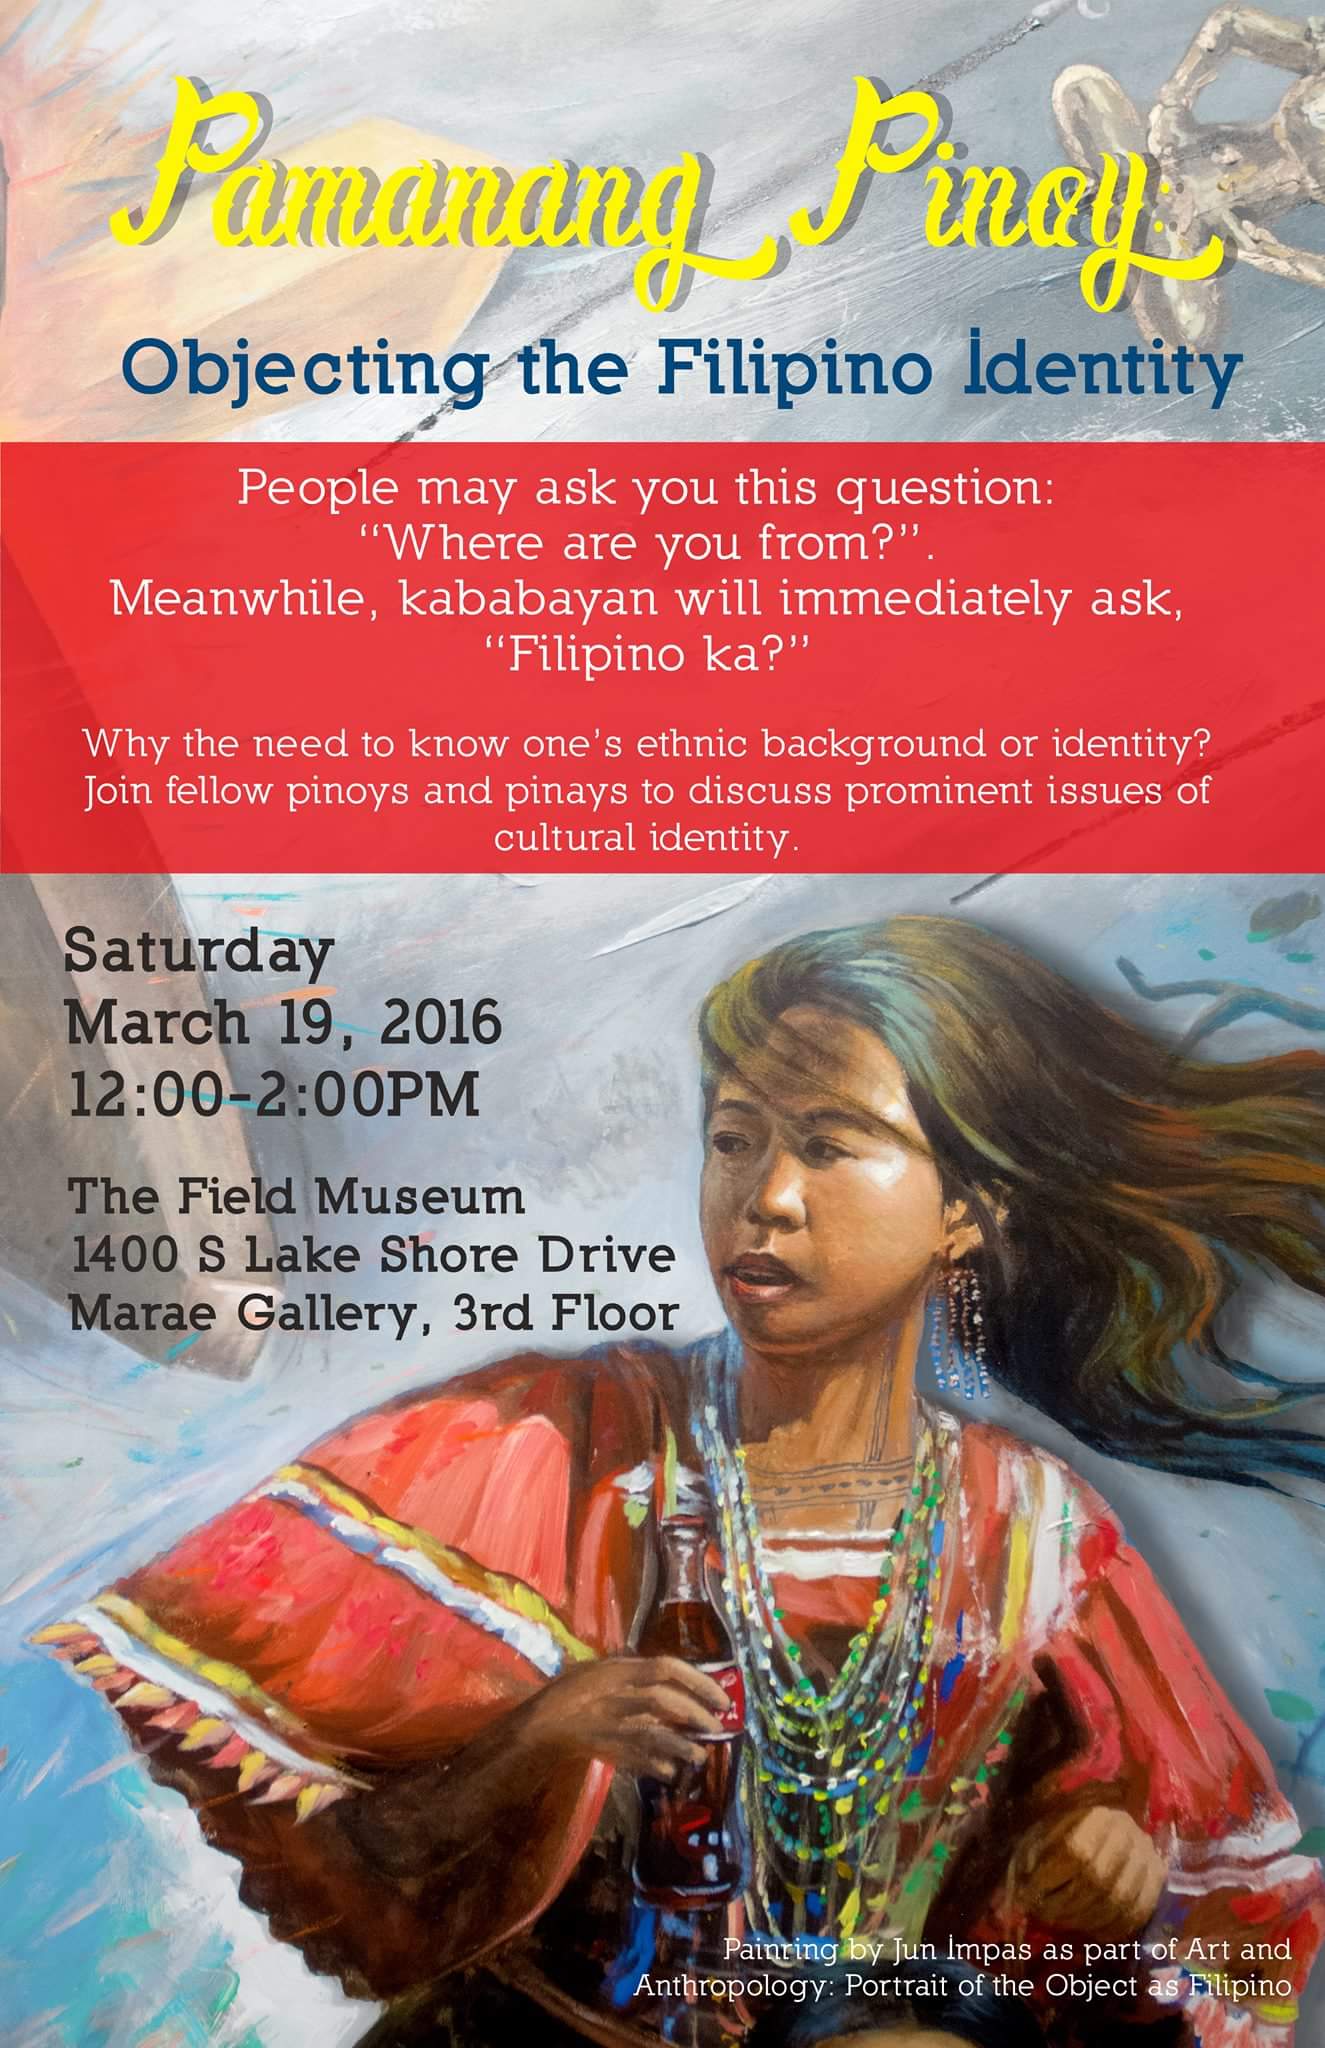 Event flier for Pamanang Pinoy: Objecting the Filipino Identity (c) Field Museum of Natural History - CC BY-NC 4.0